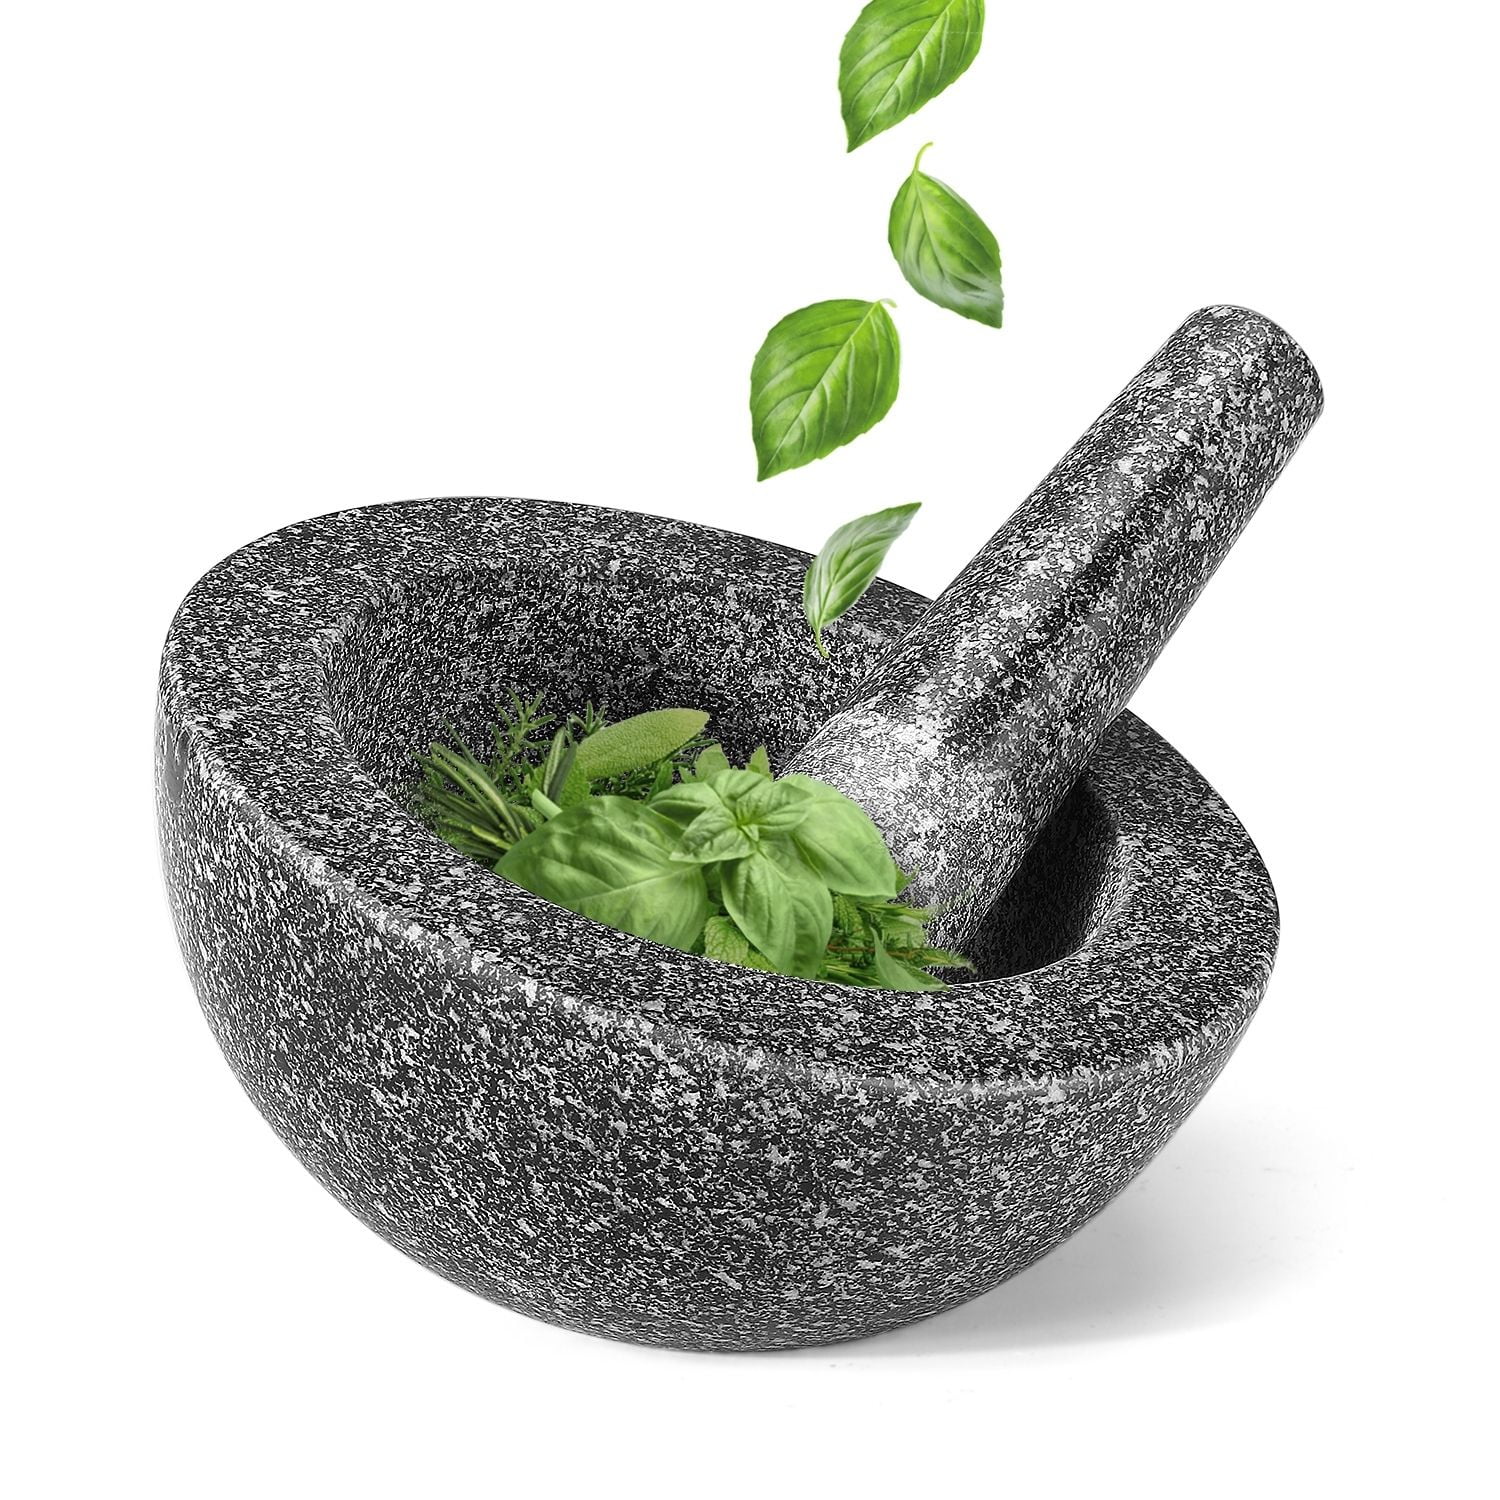 Granite Mortar and Pestle Set - Solid Granite Stone Grinder Bowl Holder 6.4  Inch For Guacamole, Herbs, Spices, Garlic, Kitchen, Cooking, Medicine 